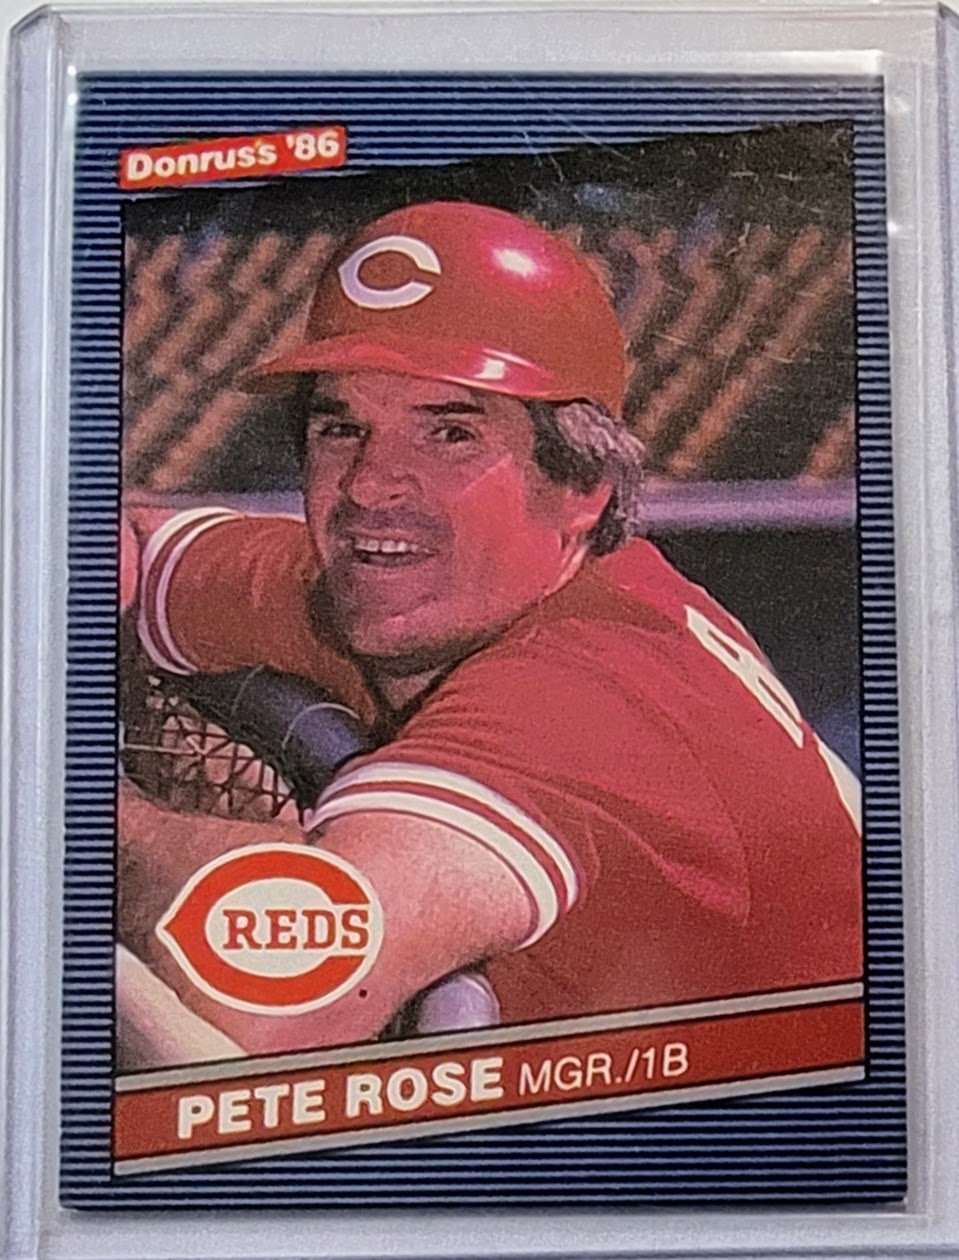 1986 Donruss Pete Rose Baseball Trading Card TPTV simple Xclusive Collectibles   